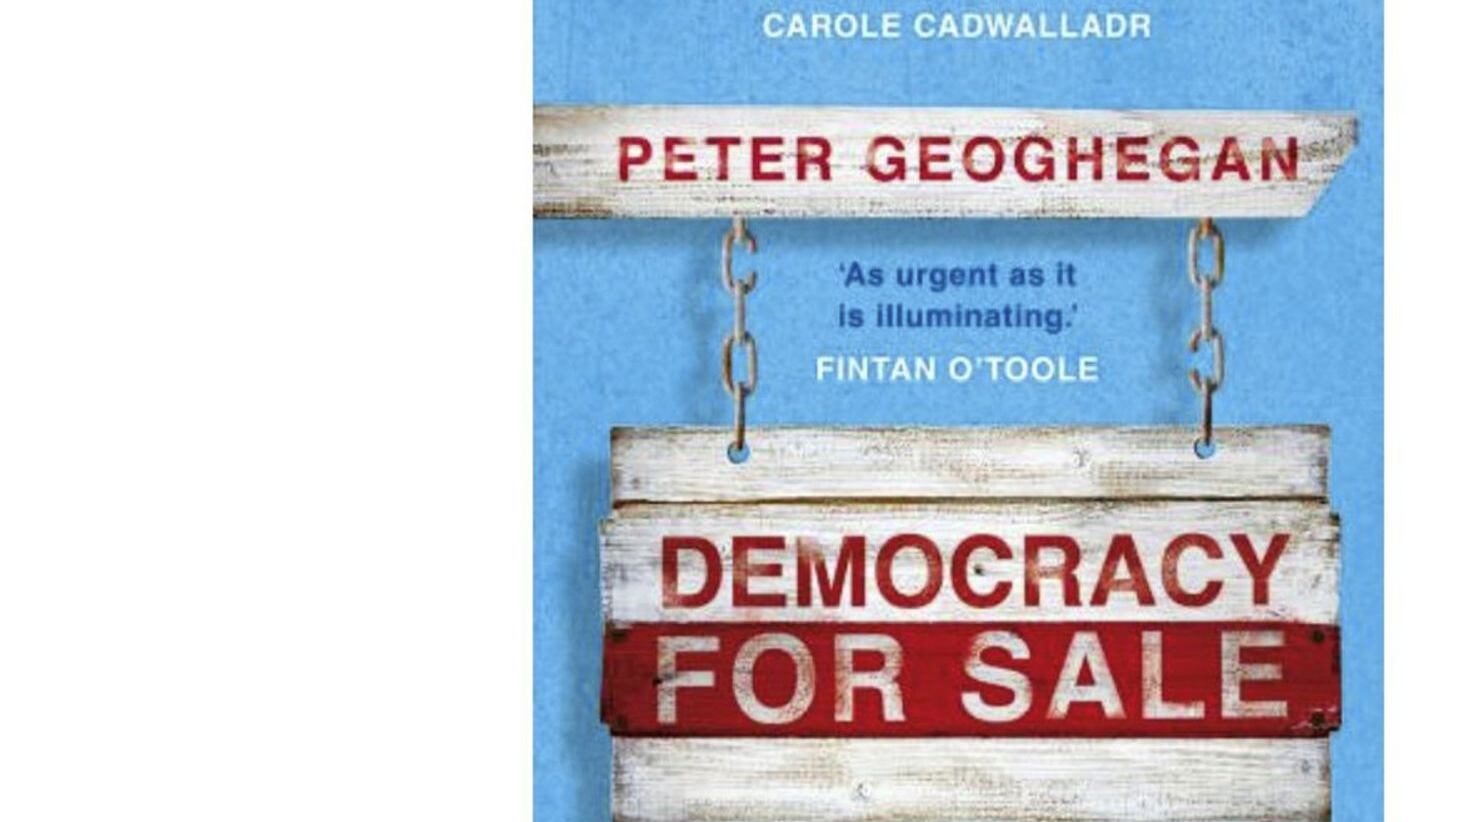 Peter Geoghegan&#39;s Democracy For Sale includes an entire chapter on the DUP&#39;s &#39;dark money&#39; 